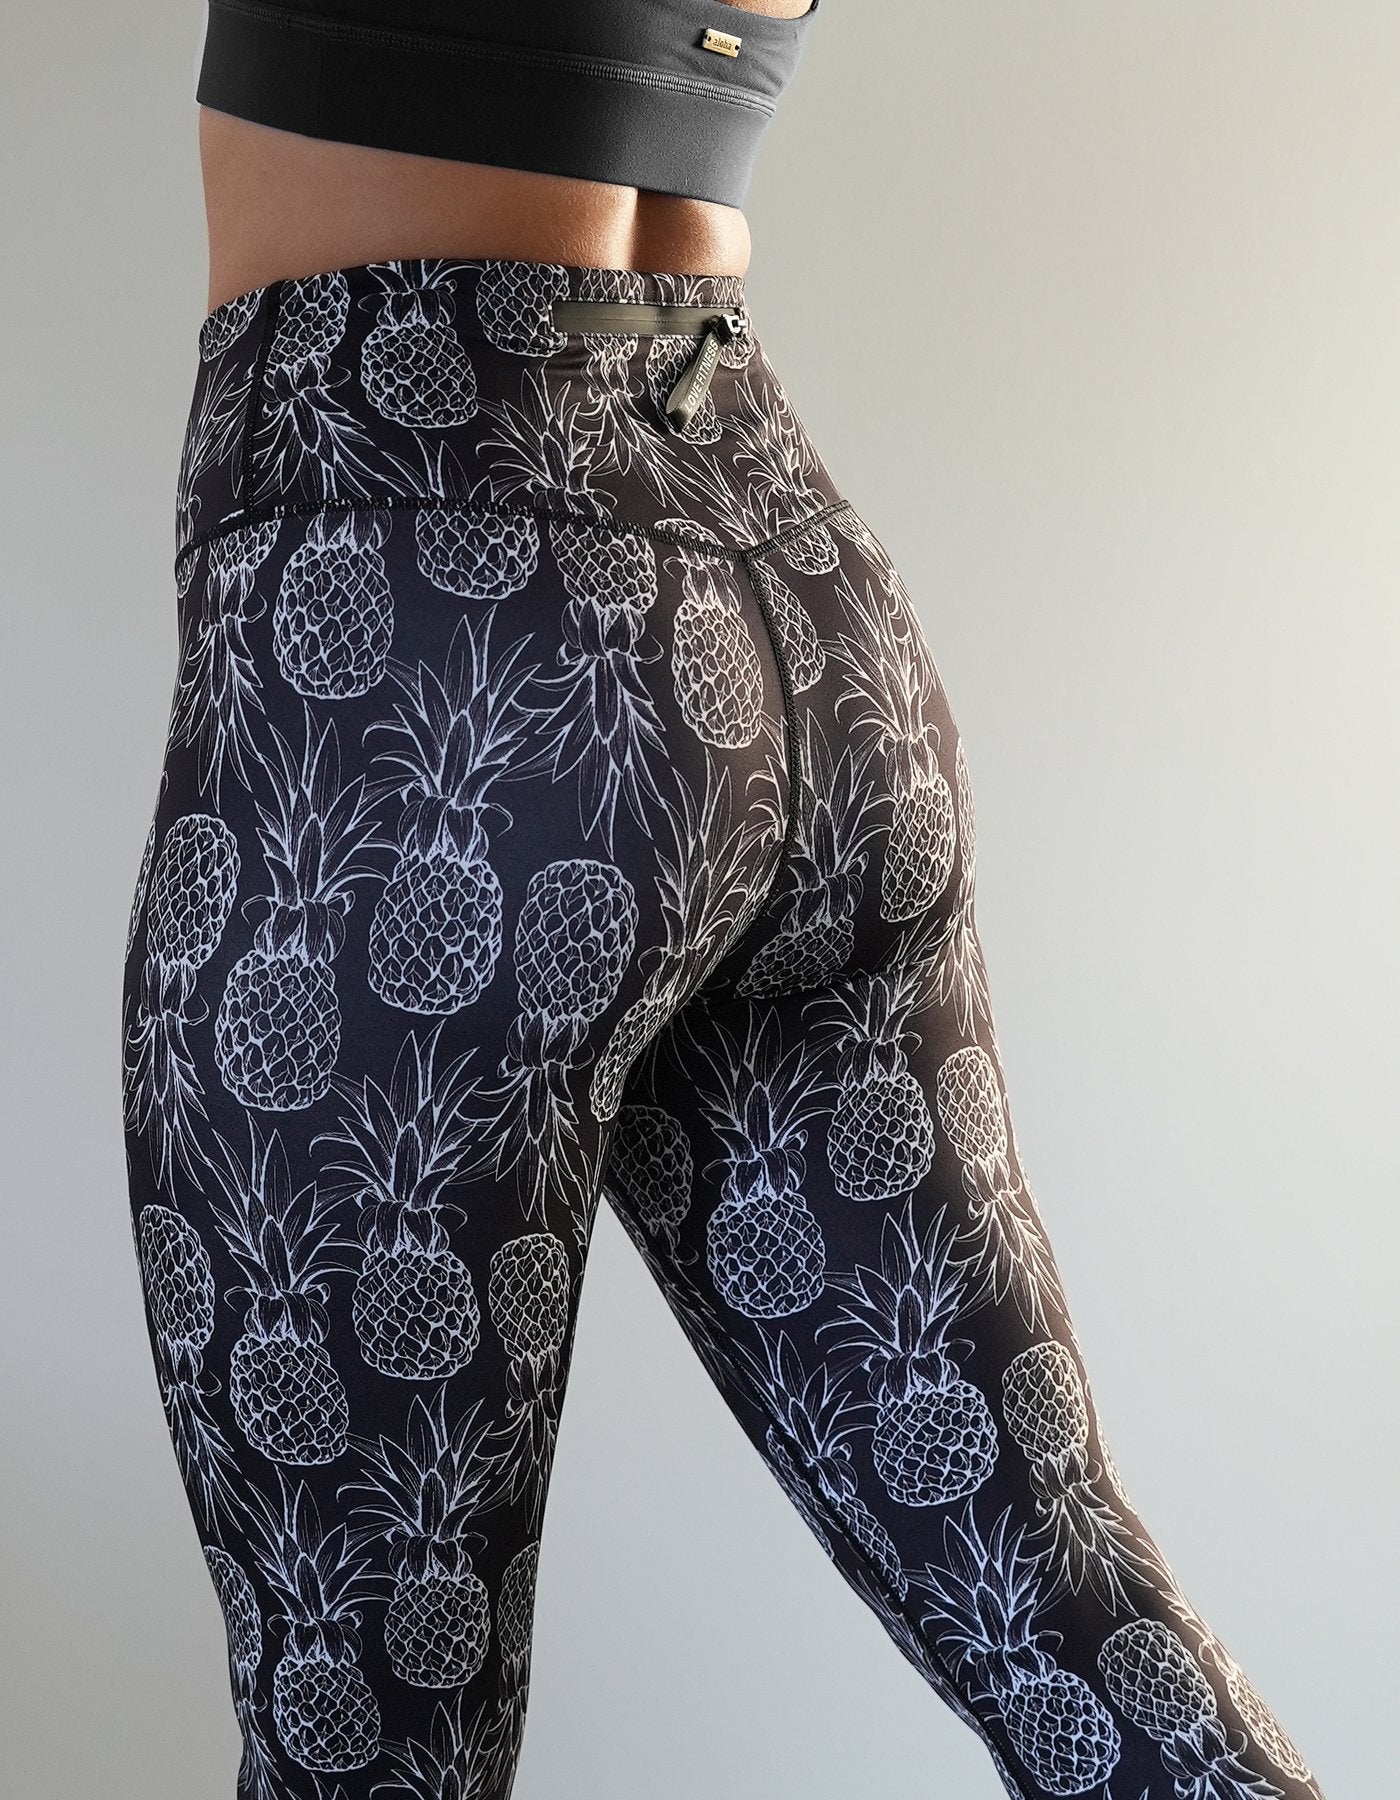 Crimson tavernorlando most popular pineapple leggings in black. Work out, going out and ocean approved